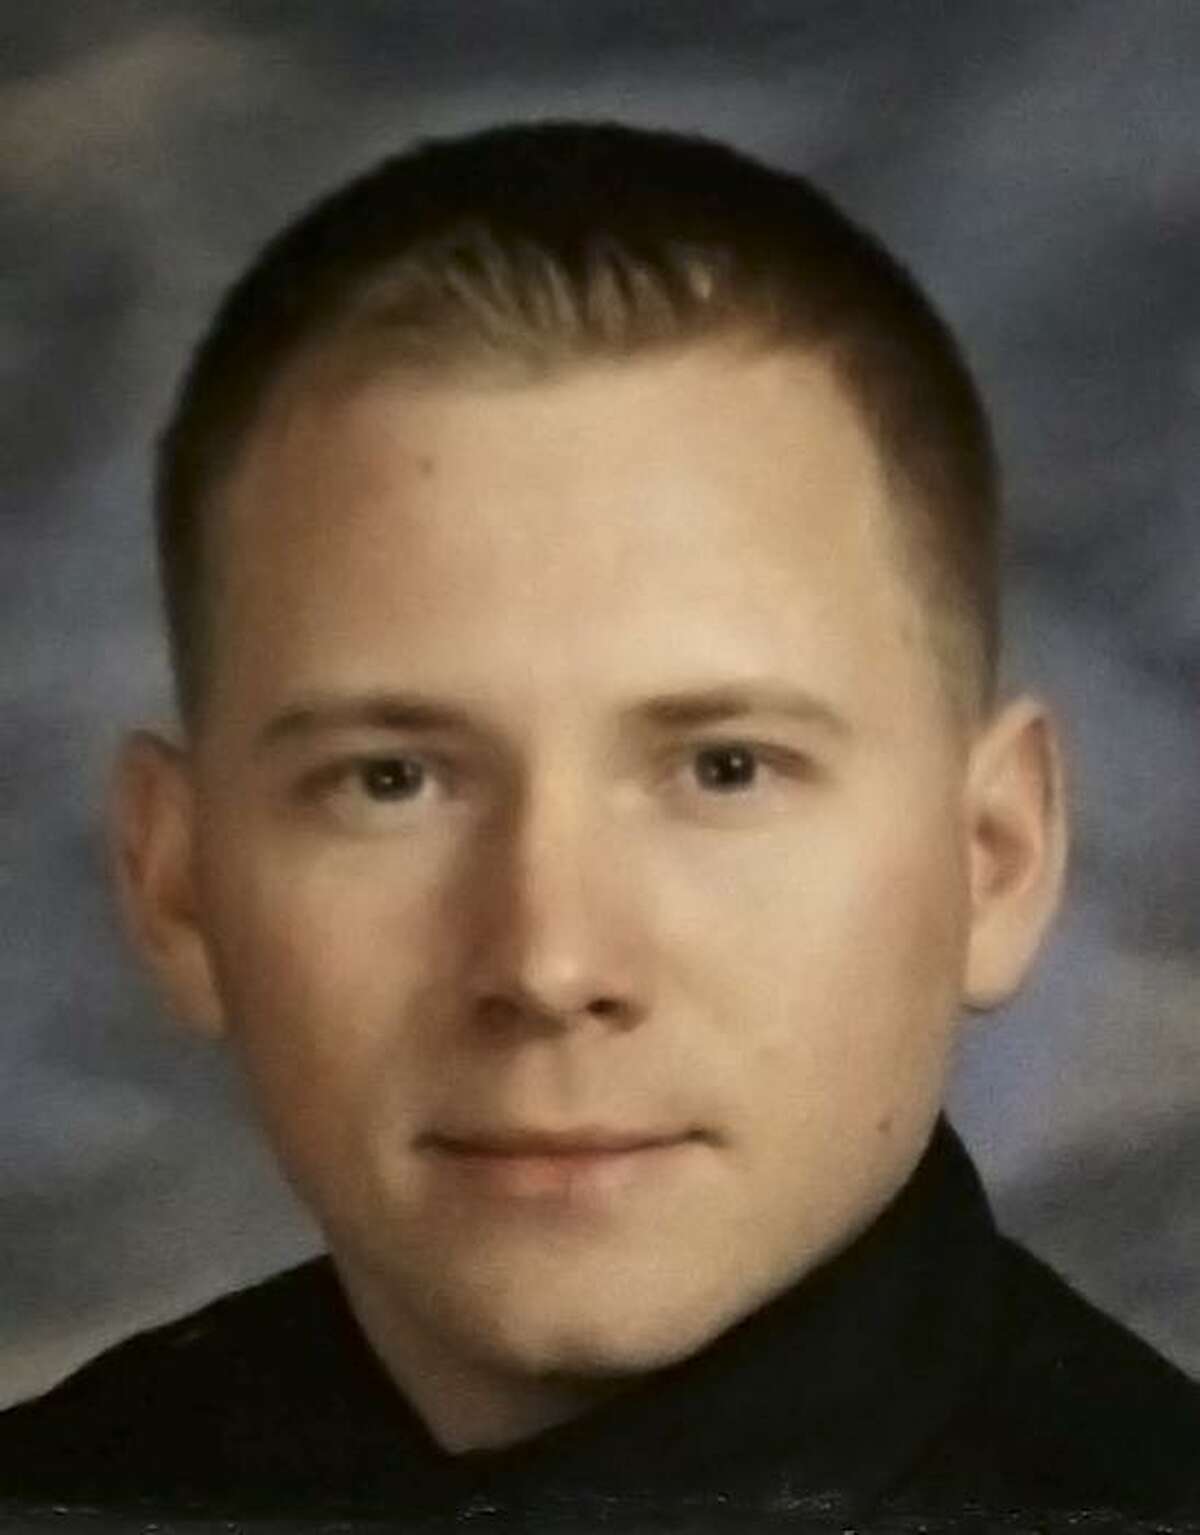 Firefighter Scott Deem, 31, died May 18, 2017 after his equipment failed while fighitng a 4-alarm fire at a Northwest Side shopping center.